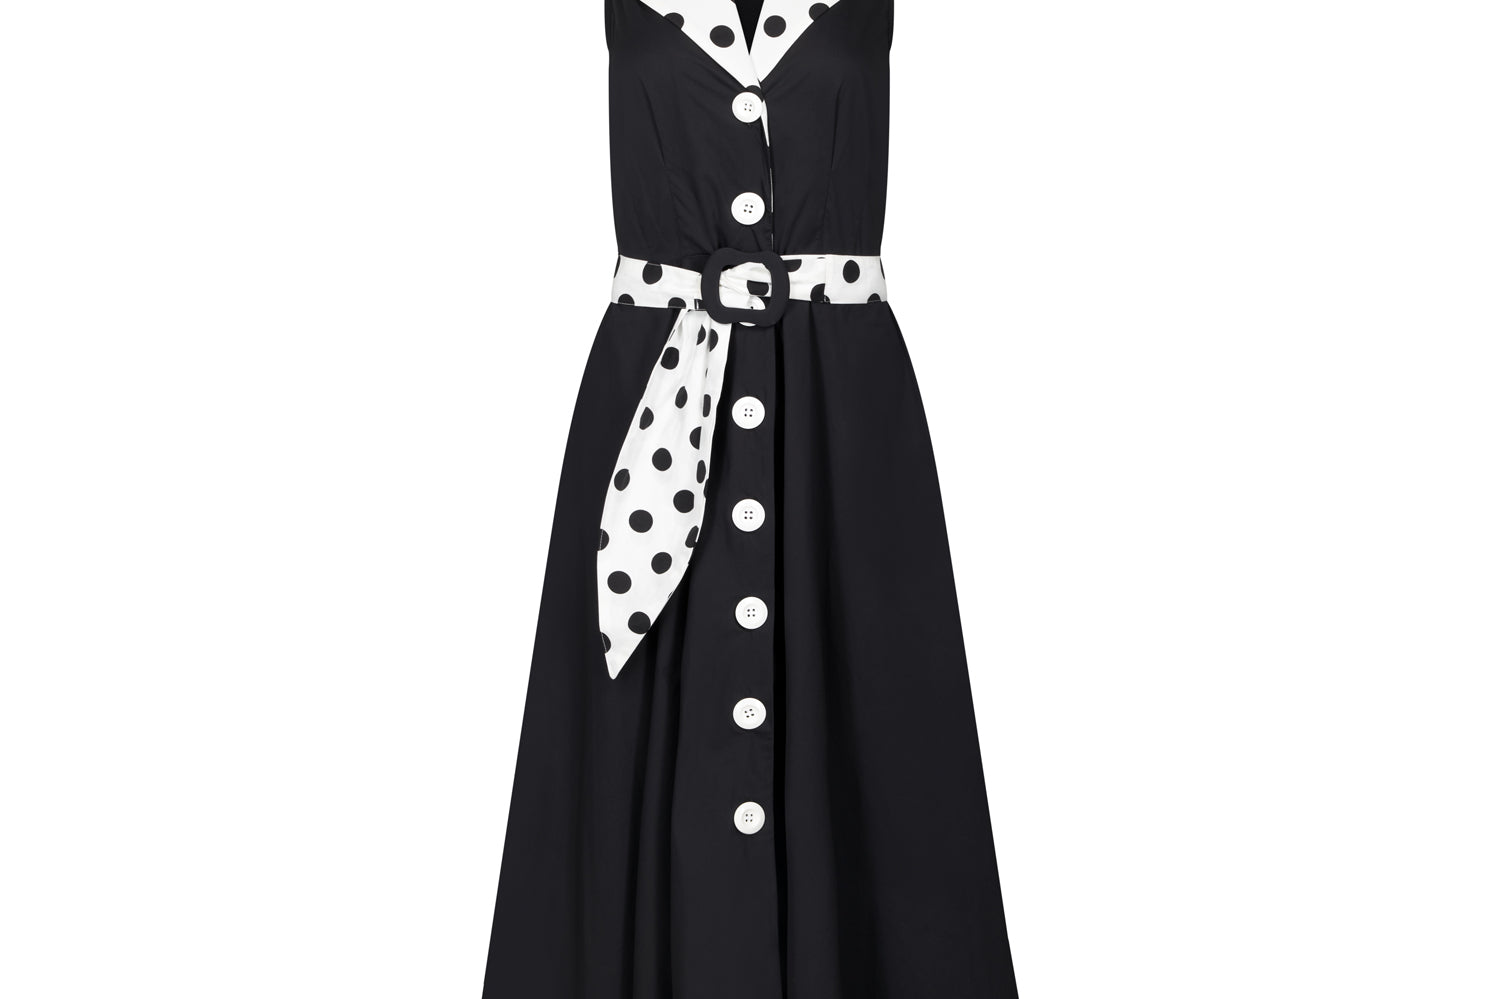 Ghost image, front view of black fit and flare polka dot midi dress.  Collar and belt is white with black polka dots and main dress is all black with white buttons on centre front. 